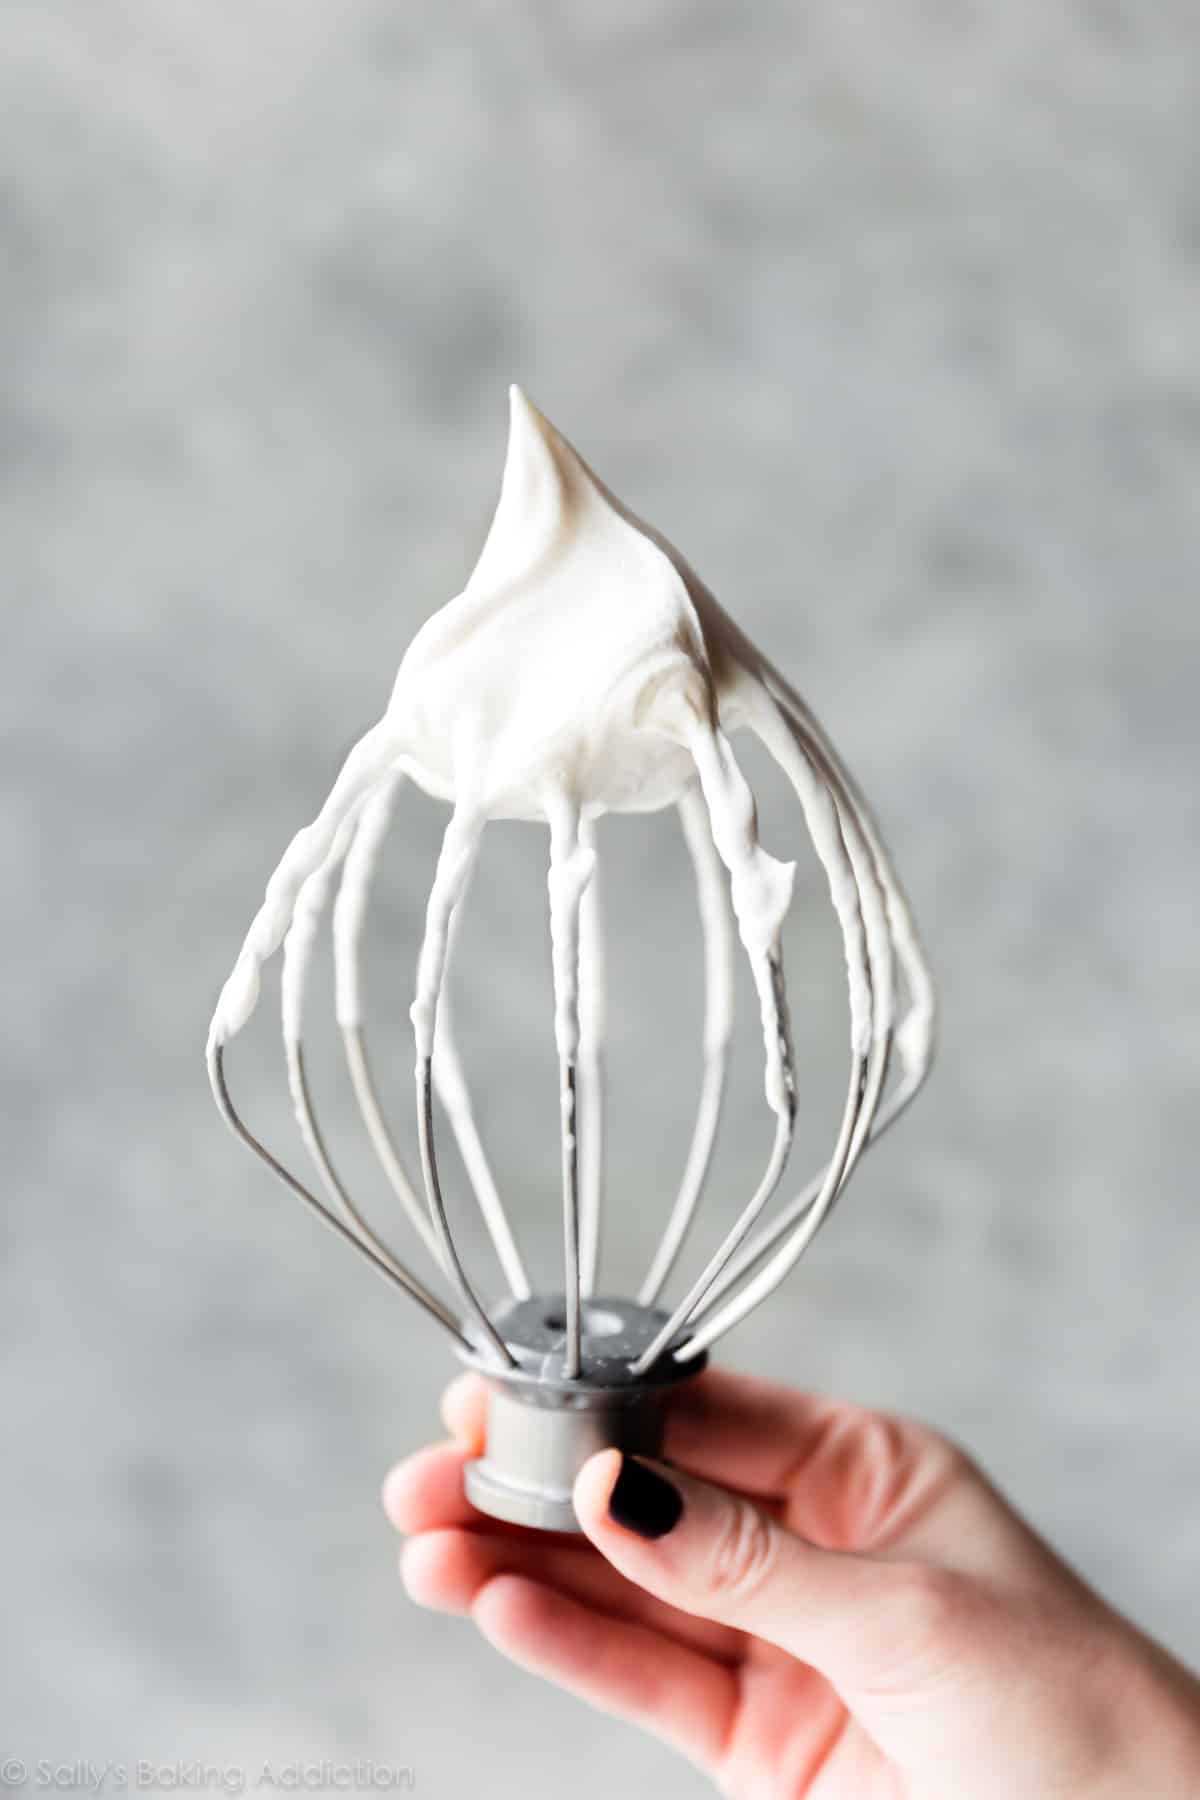 hand holding whisk attachment with whipped cream